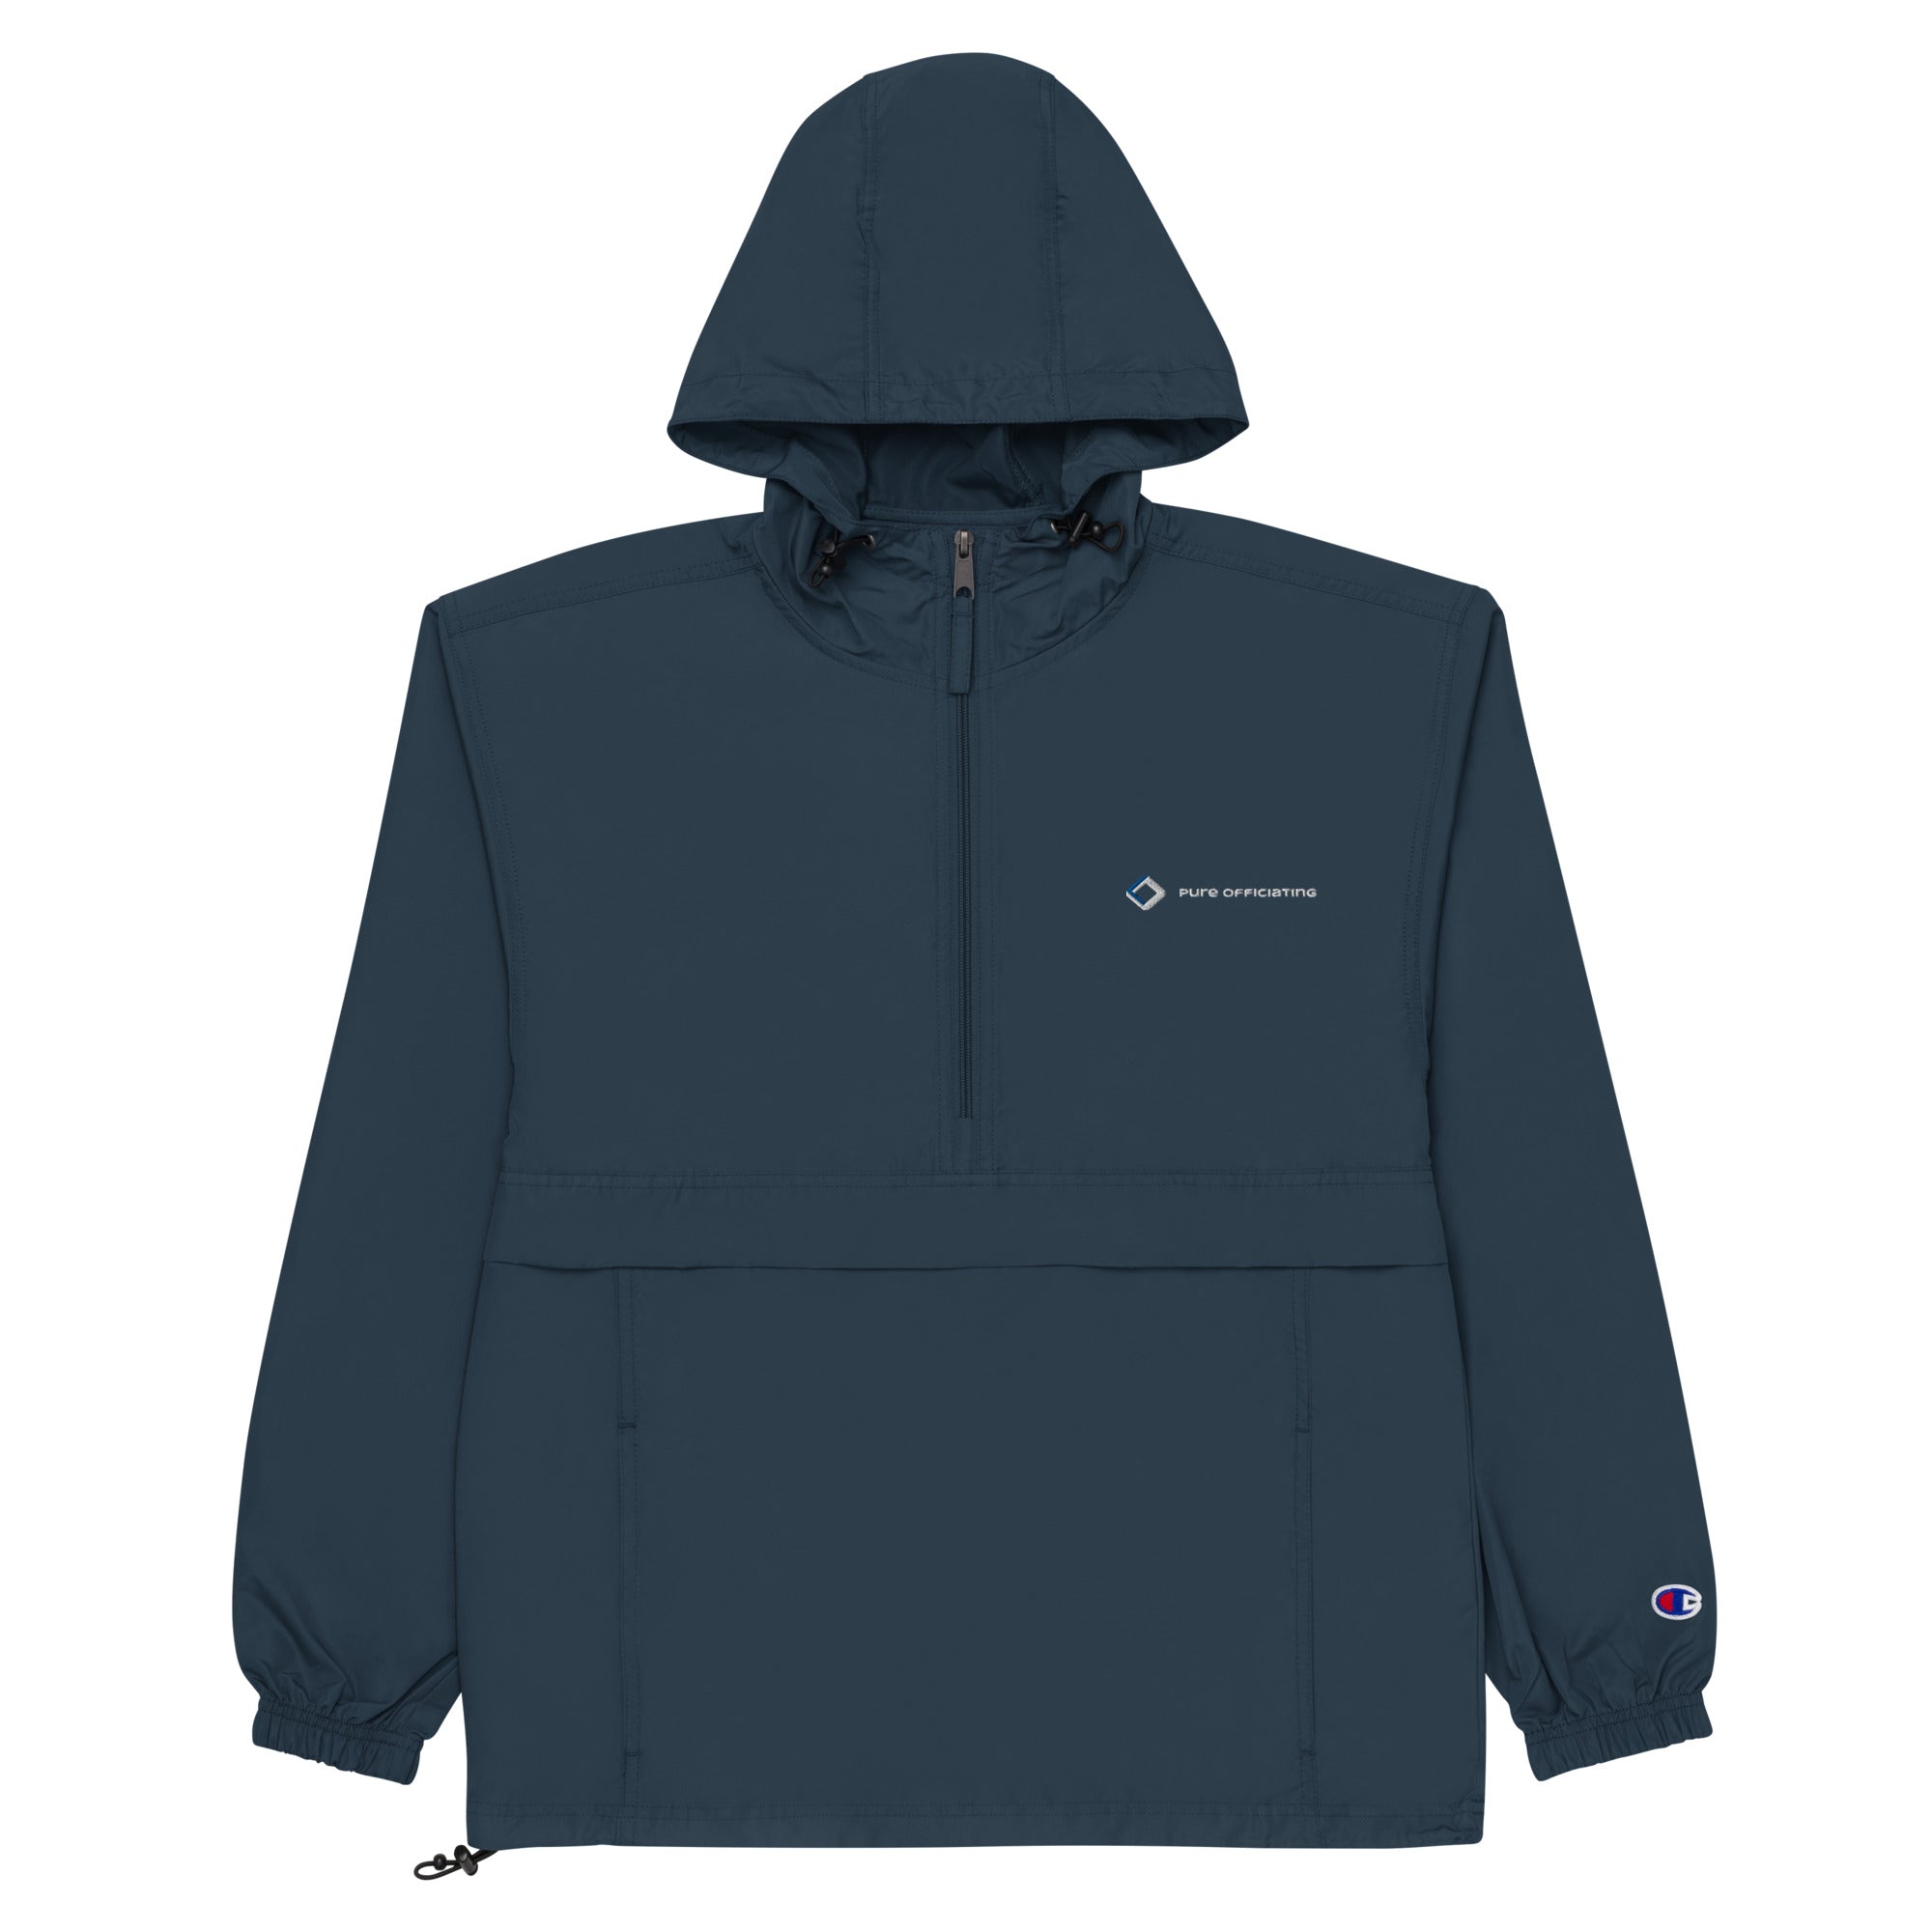 PURE OFFICIATING Embroidered Champion Packable Jacket